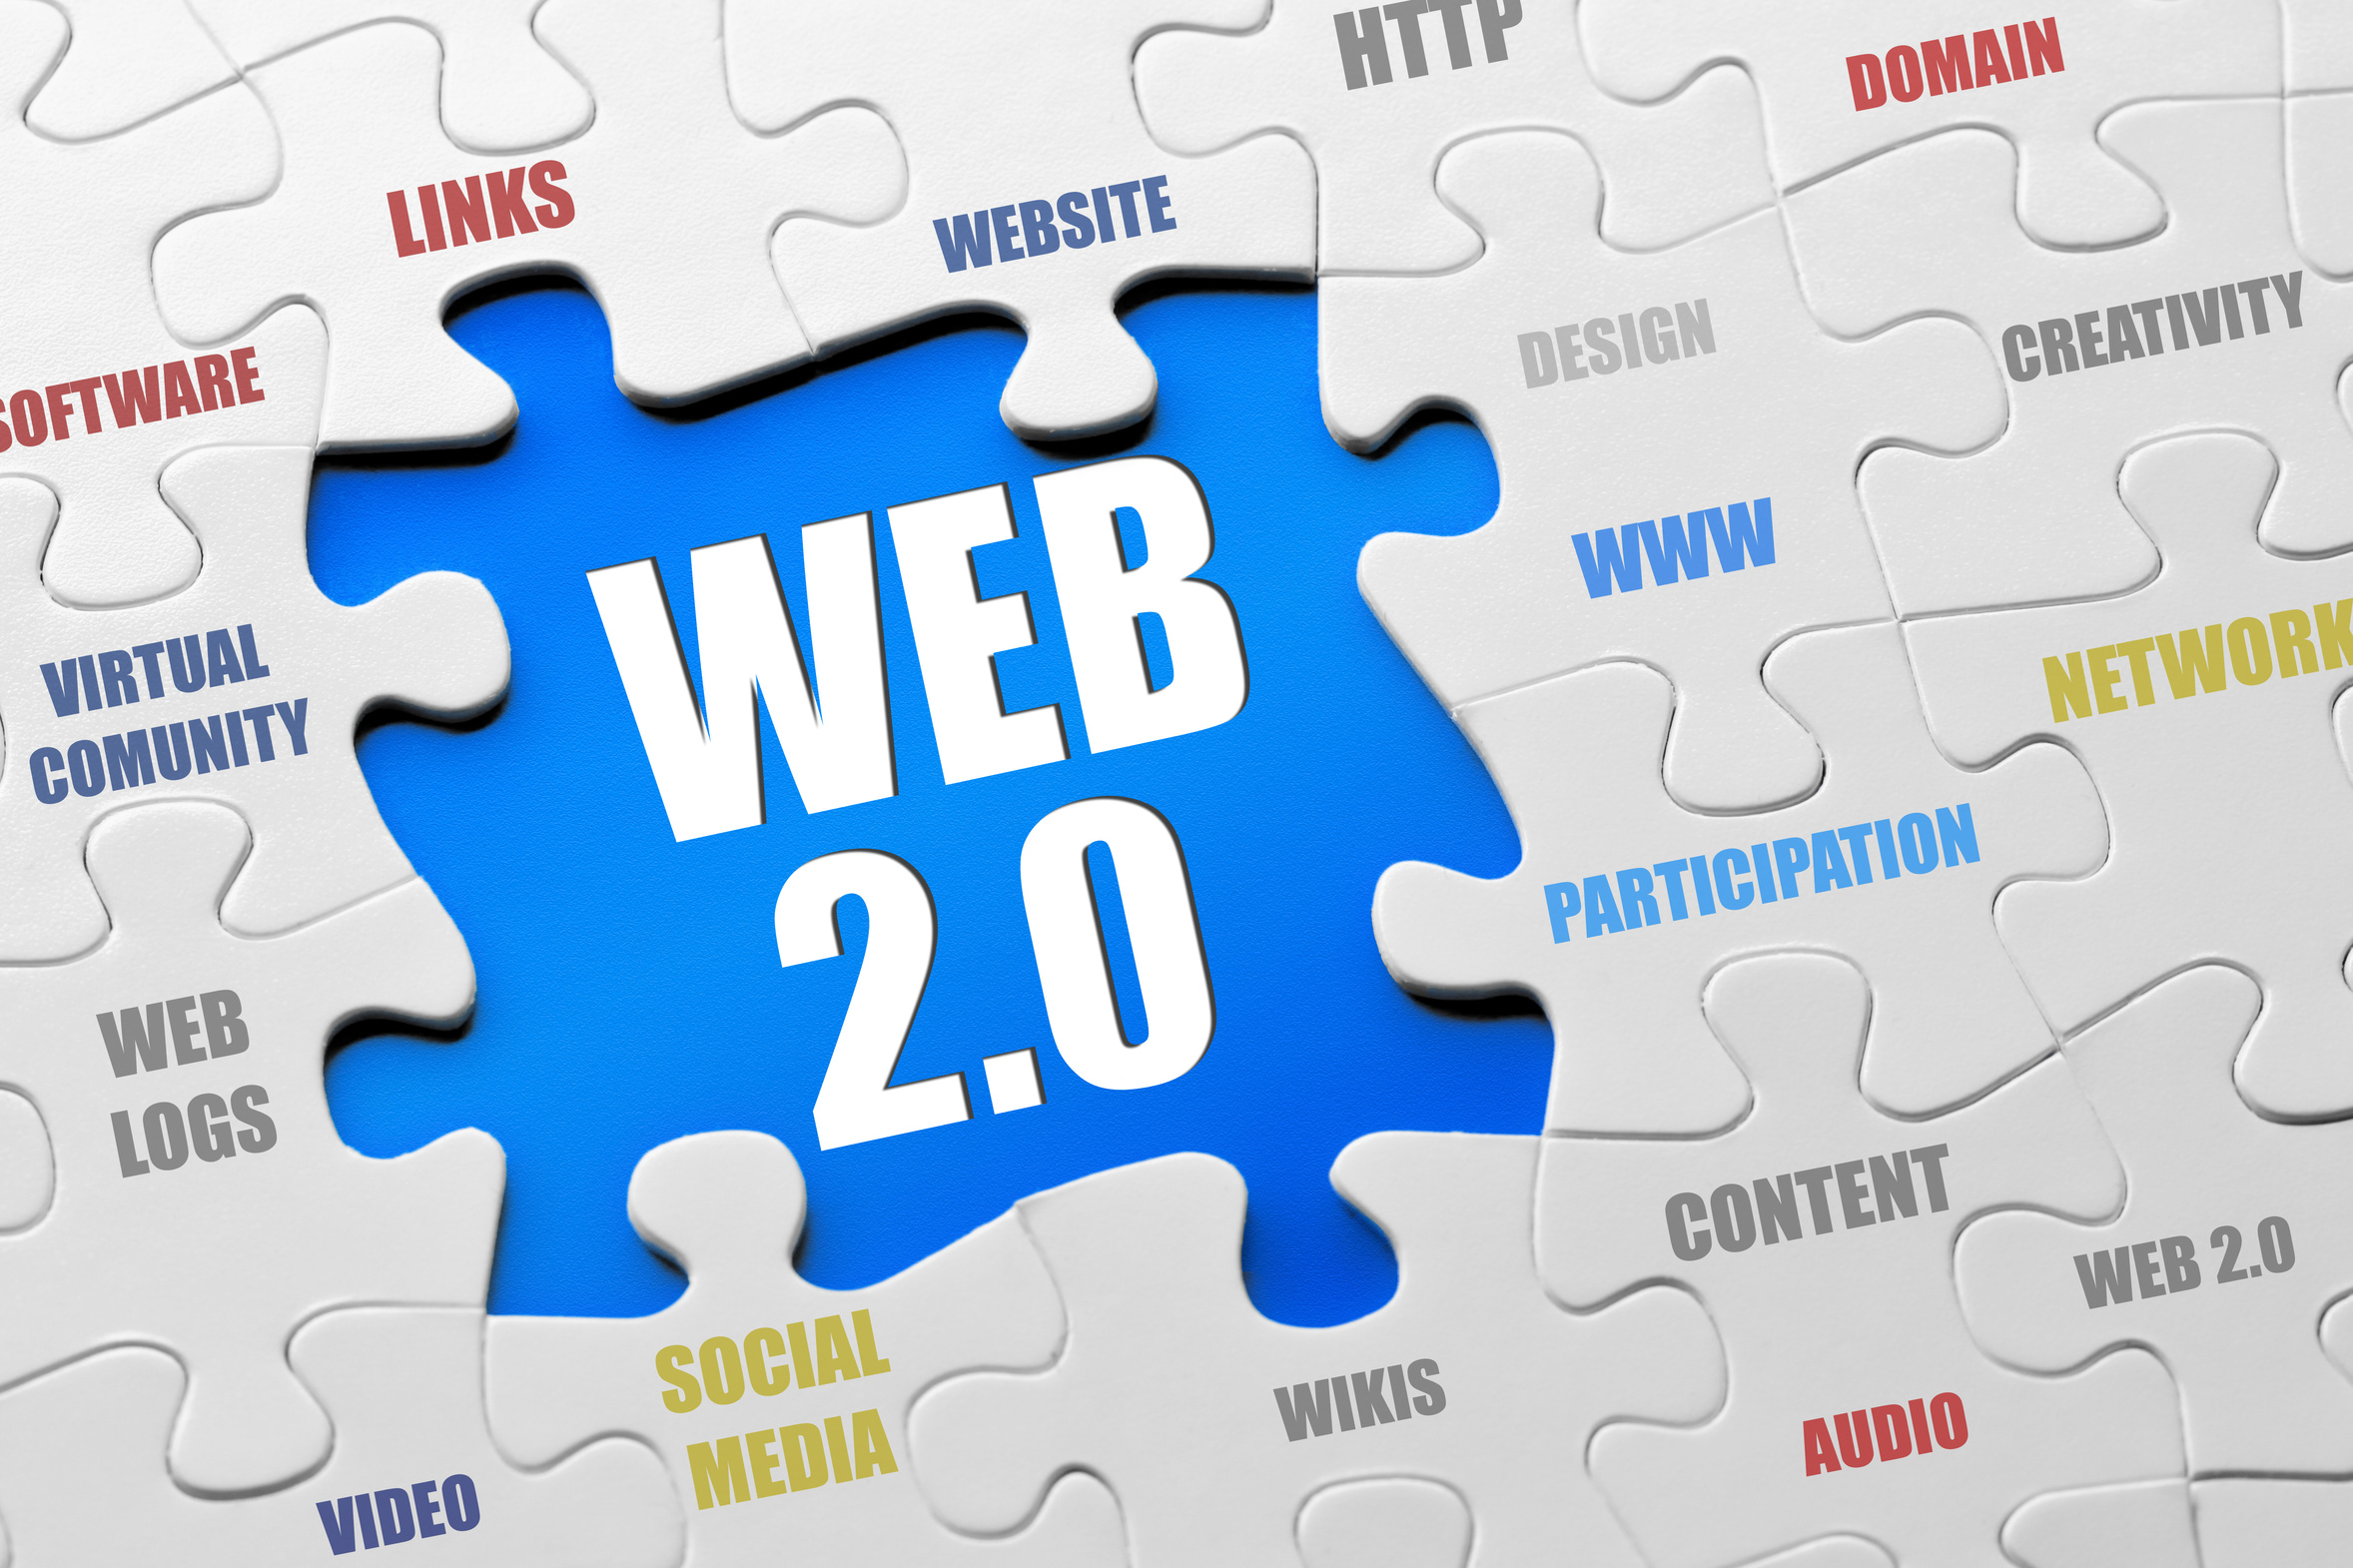 5 Web 2.0 Links Daily for 30 Days